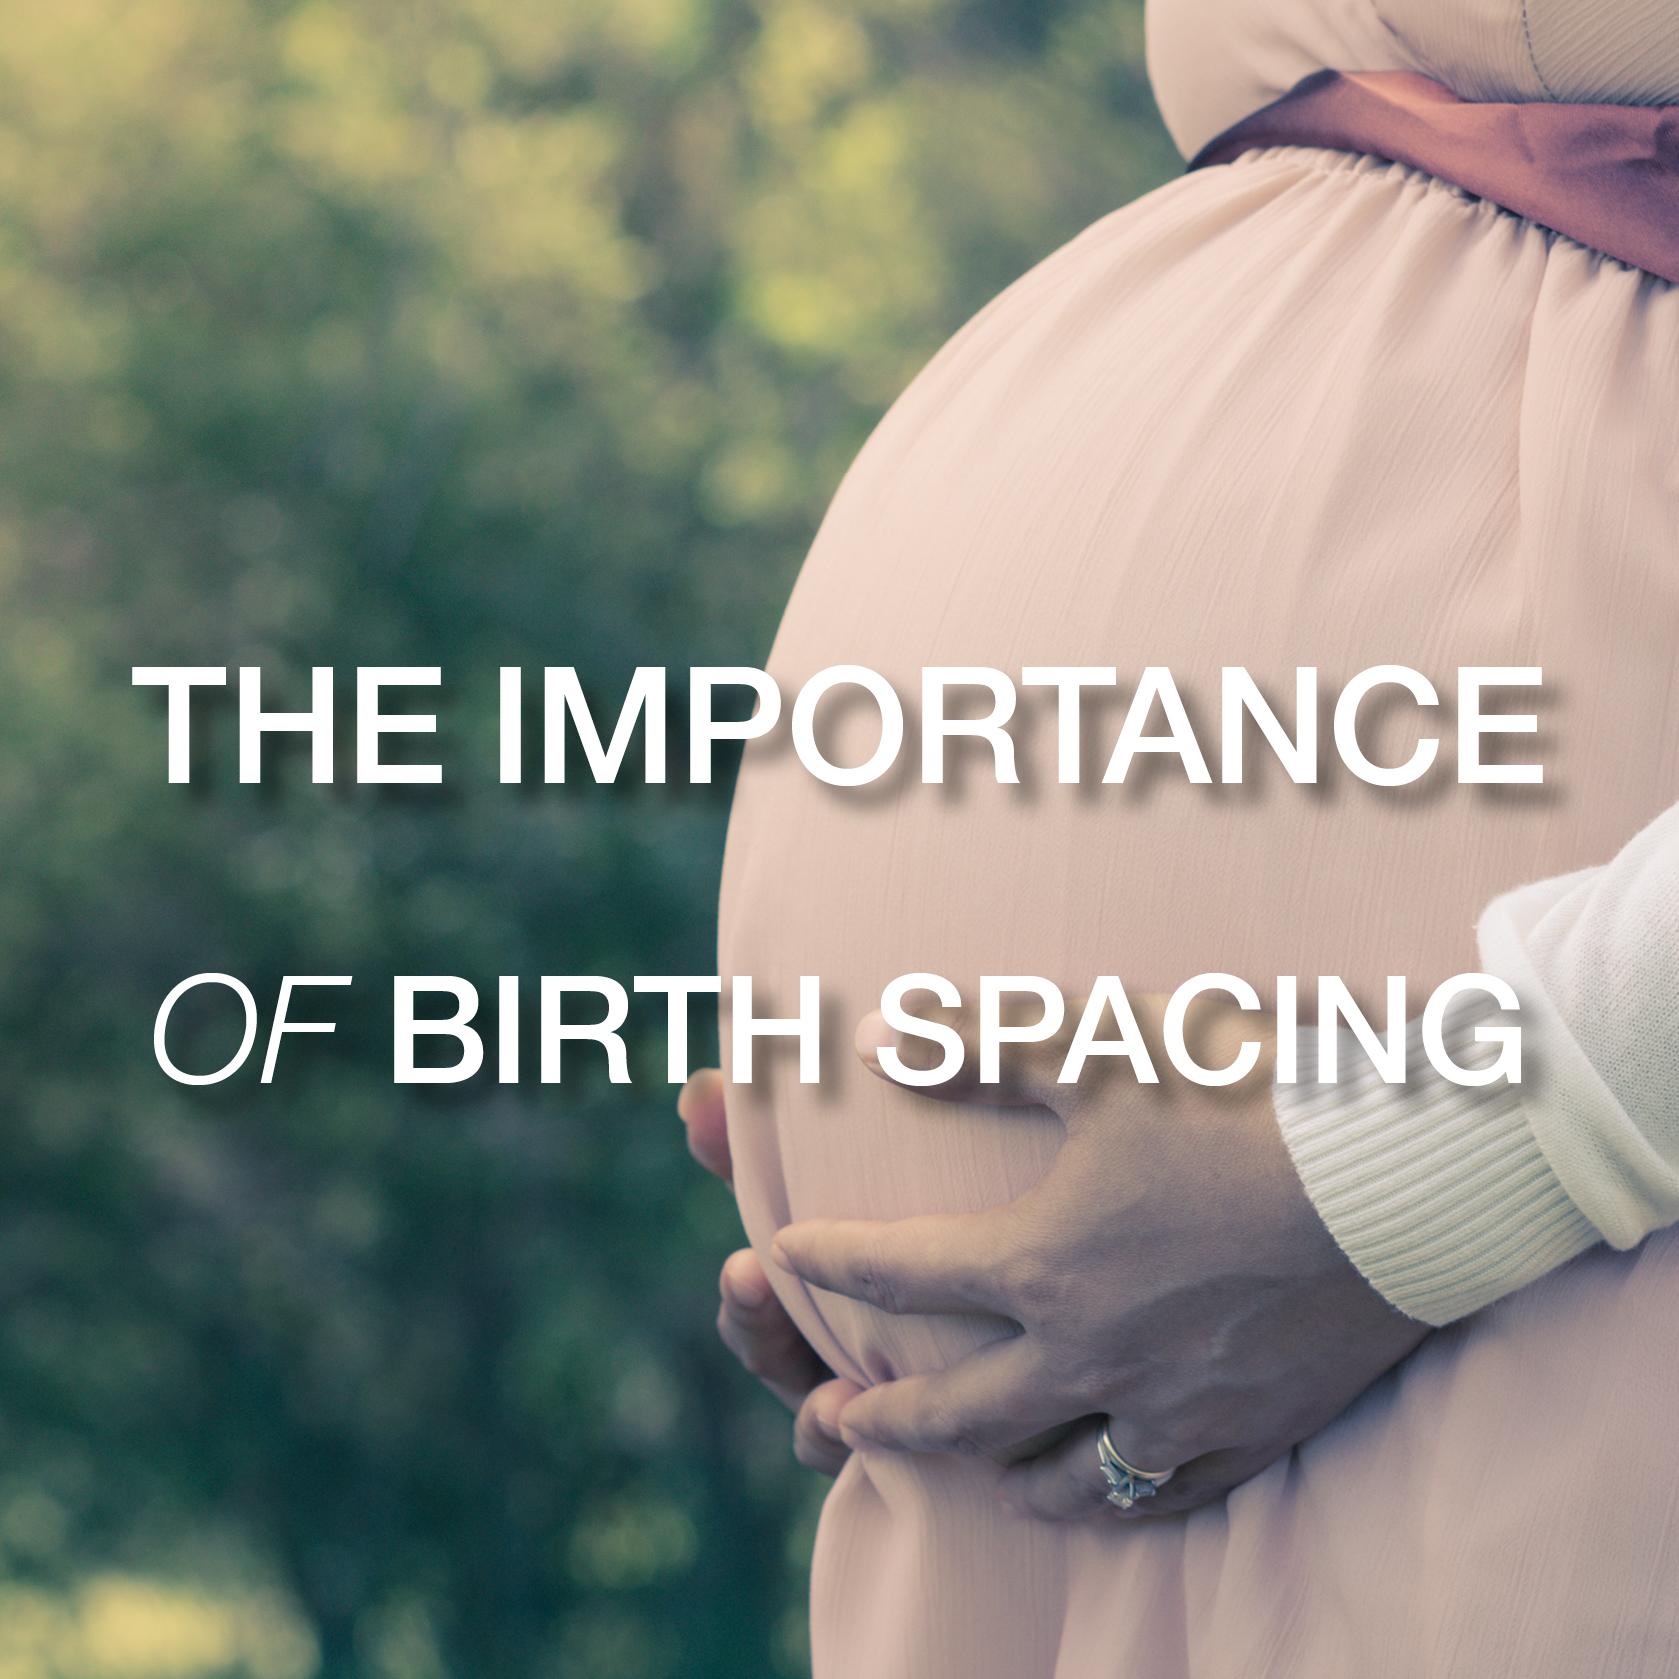 HOME VISITING: Every Mom and Mom to Be Should Understand Birth Spacing